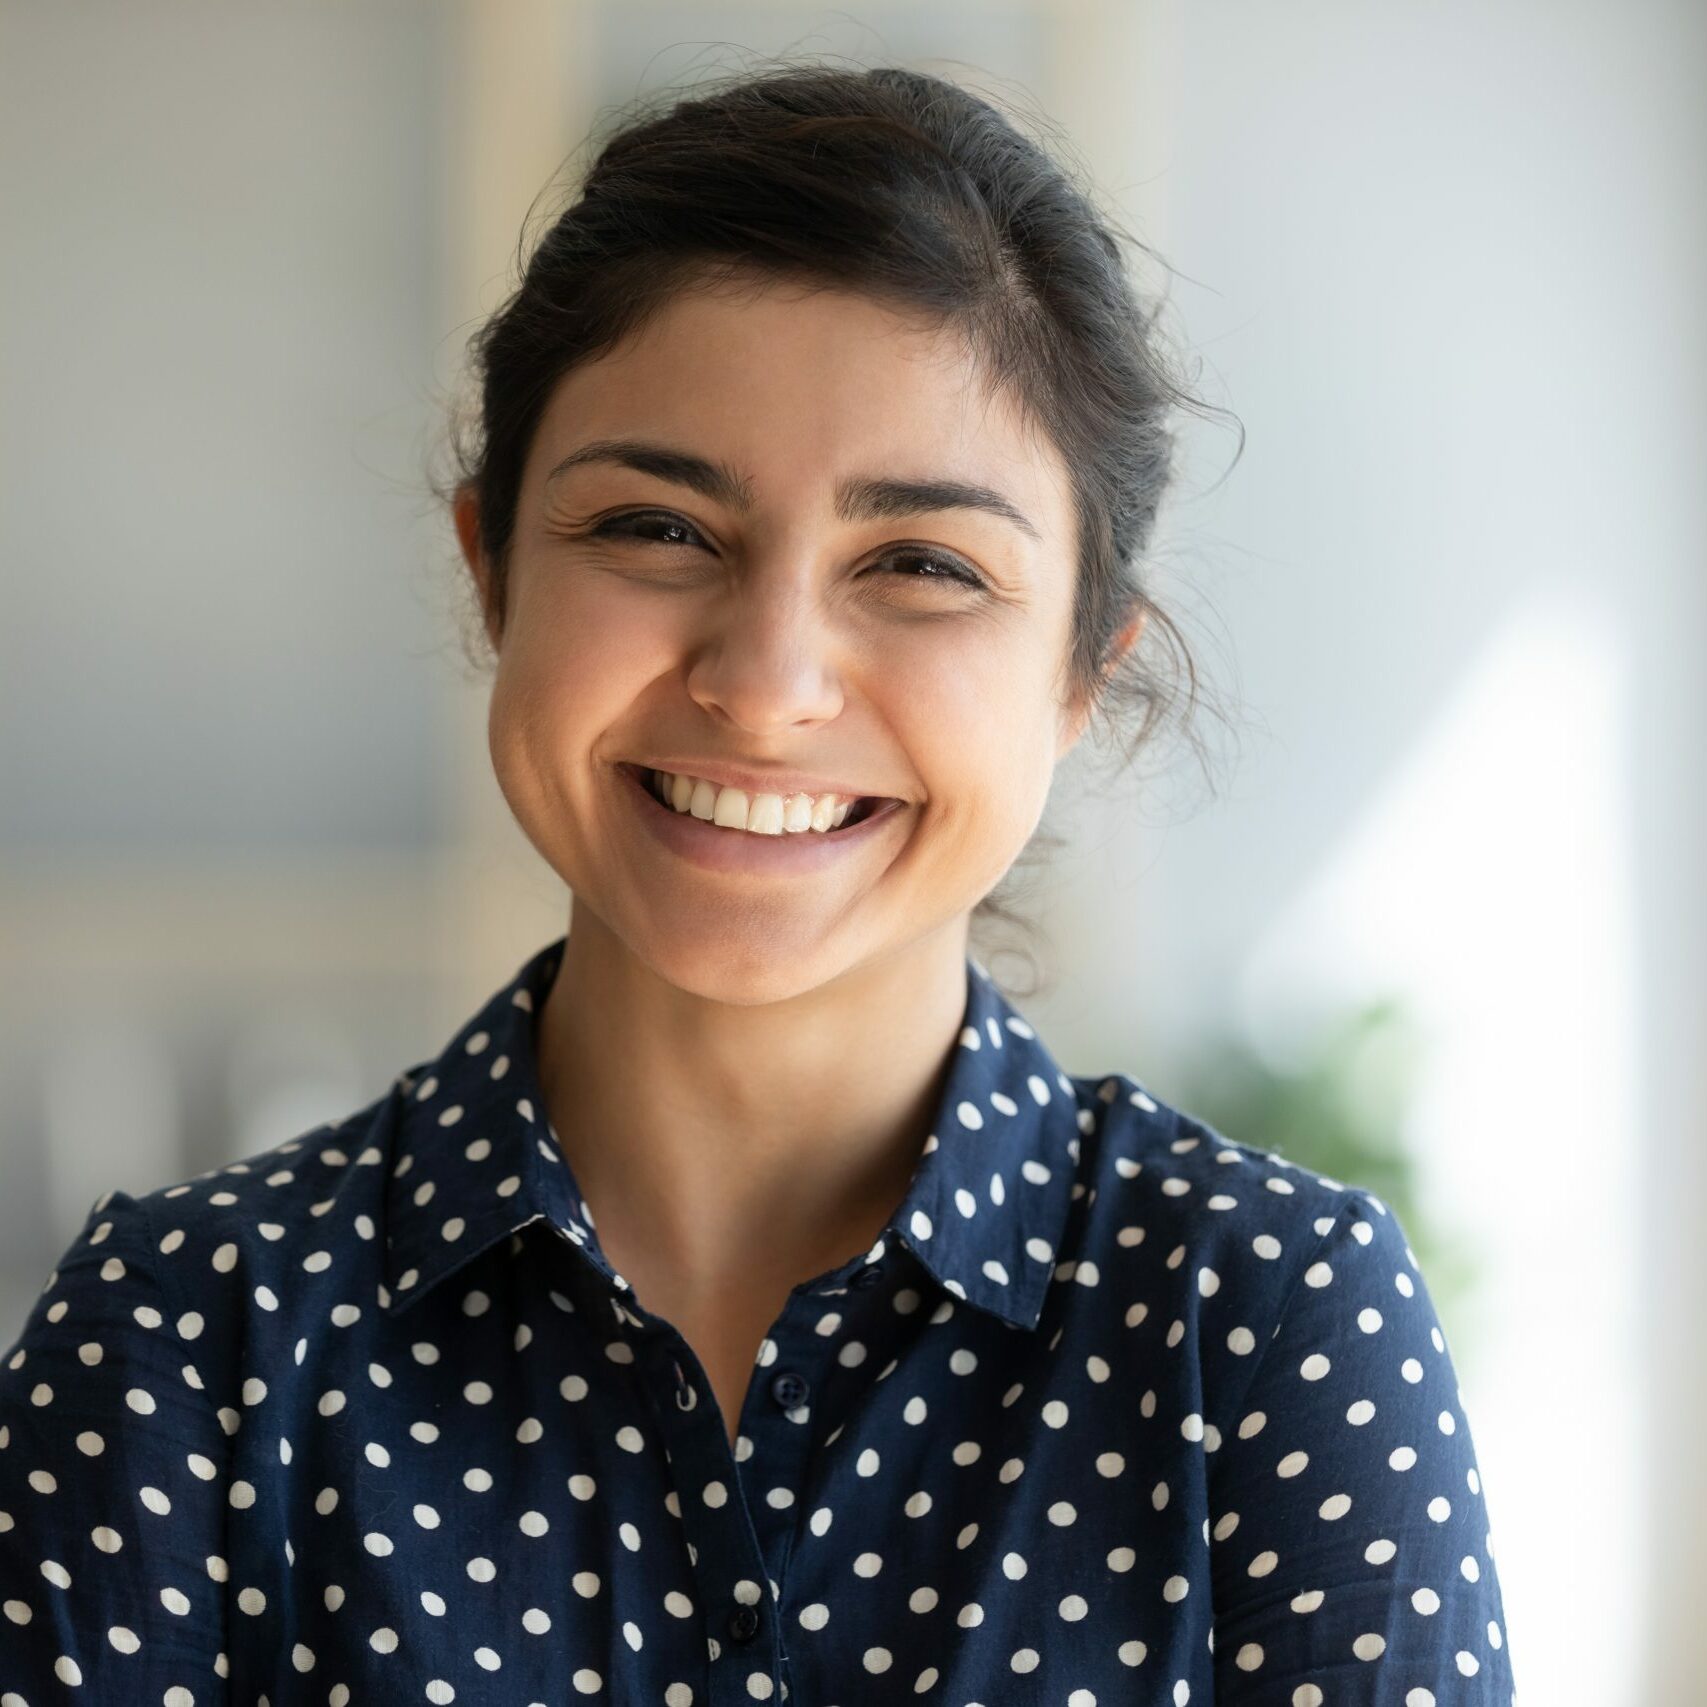 Cheerful beautiful indian girl student professional standing at home in office looking at camera, happy confident entrepreneur hindu lady laughing face posing alone, head shot close up view portrait